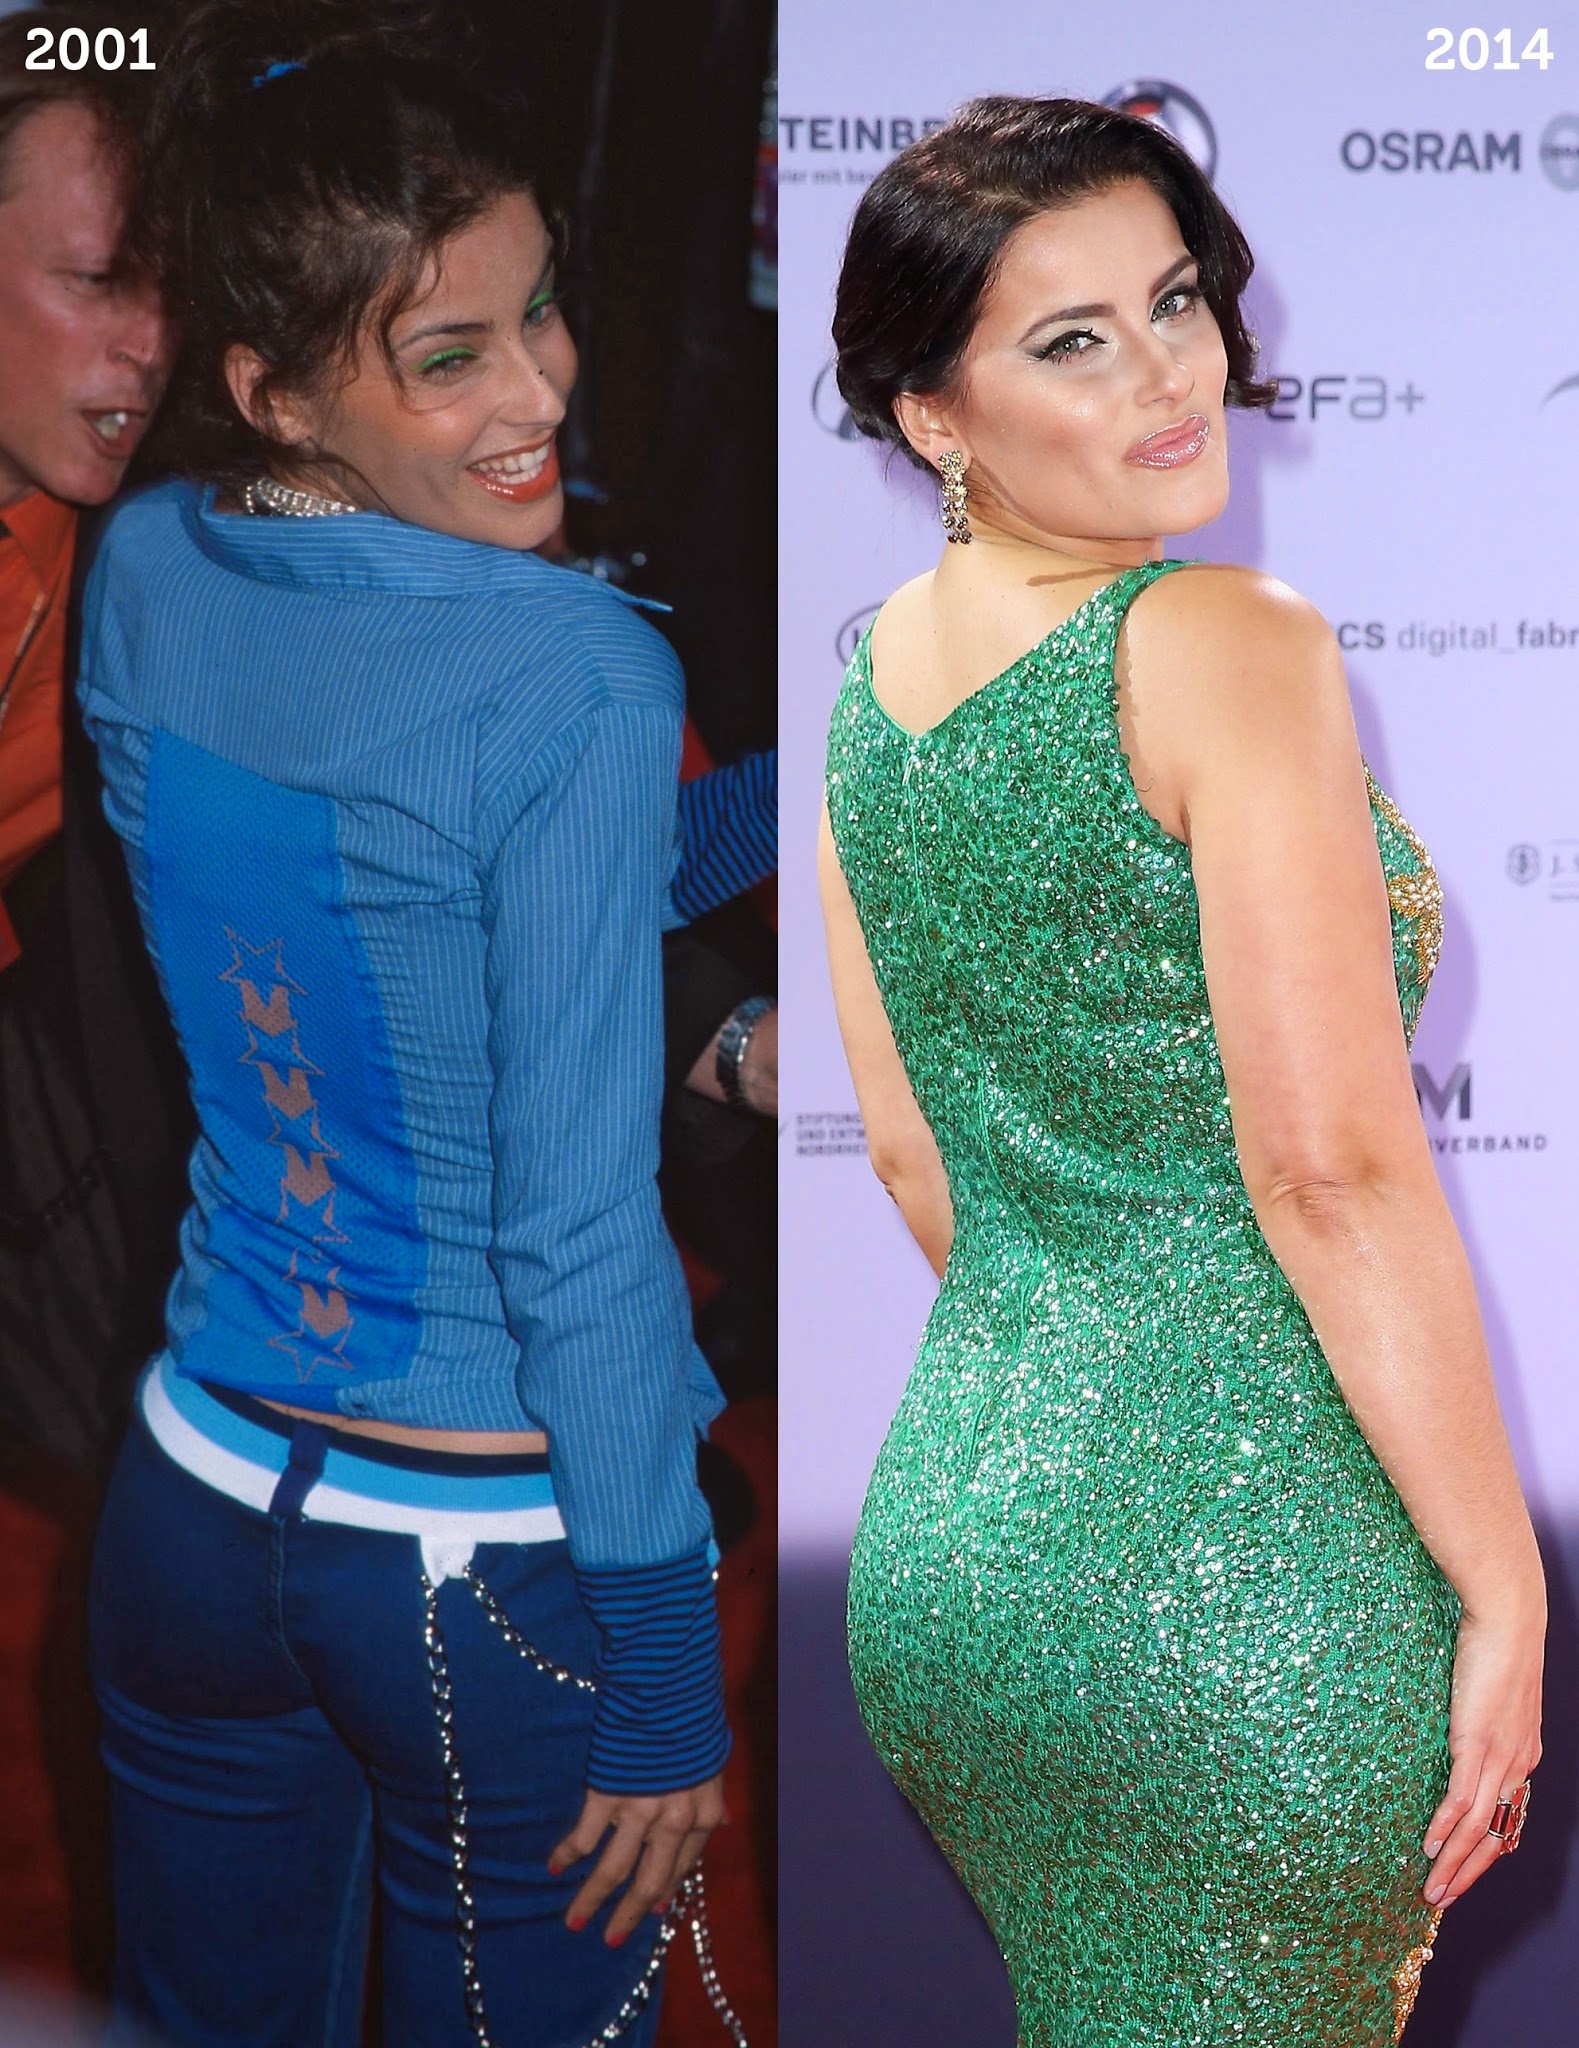 she's getting thick Nelly Furtado